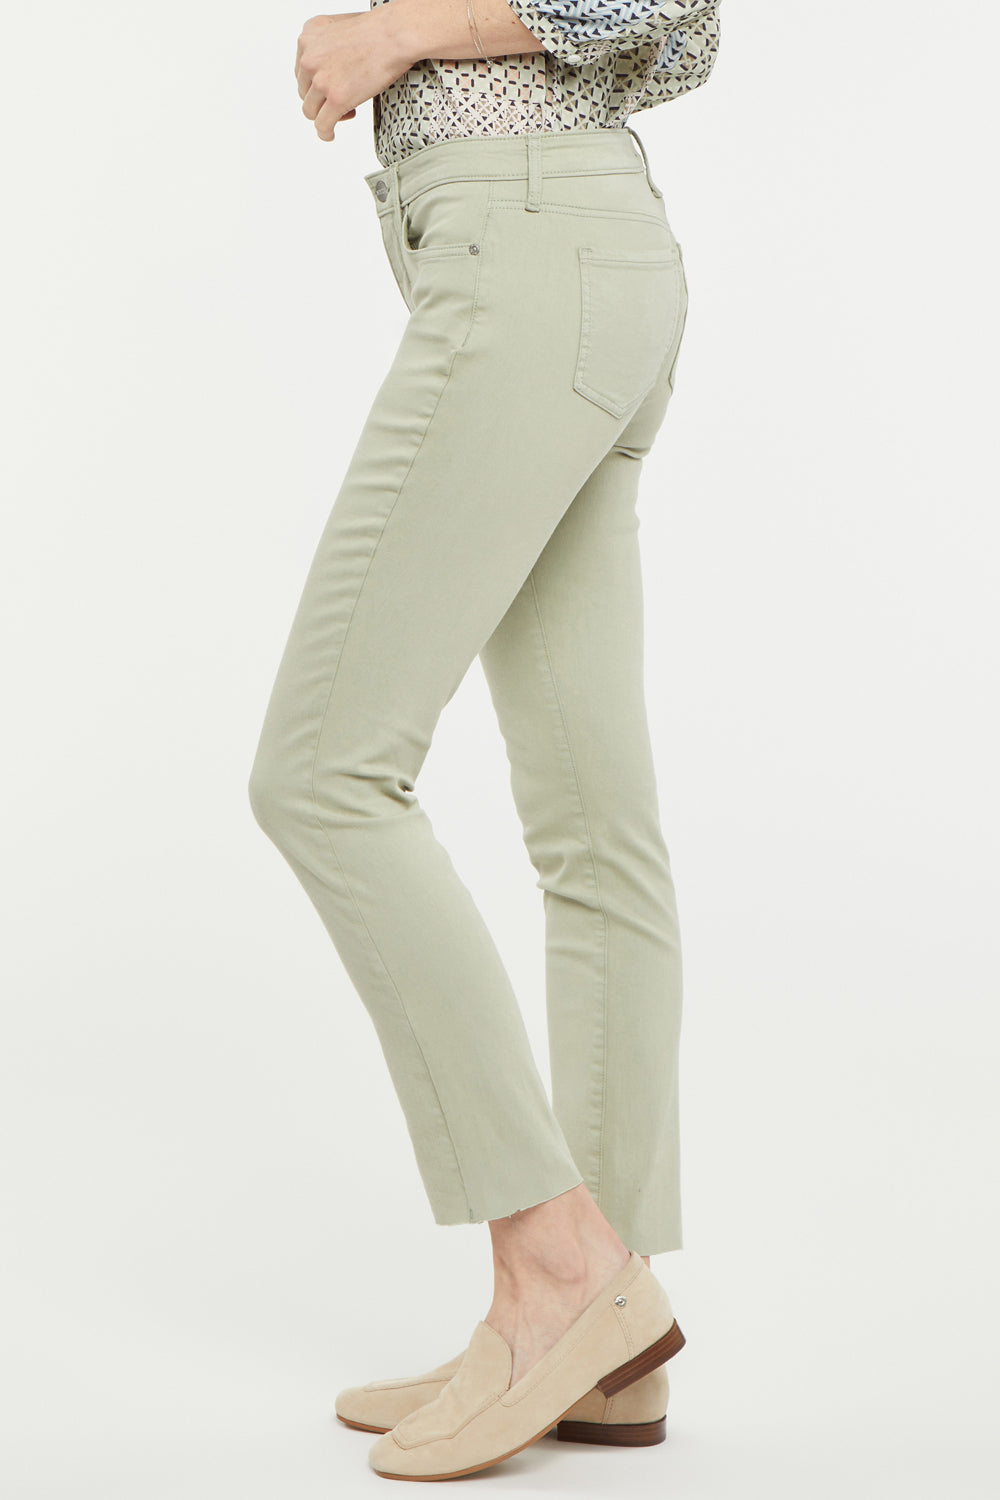 NYDJ Alina Skinny Ankle Jeans In Petite With Raw Hems - Bamboo